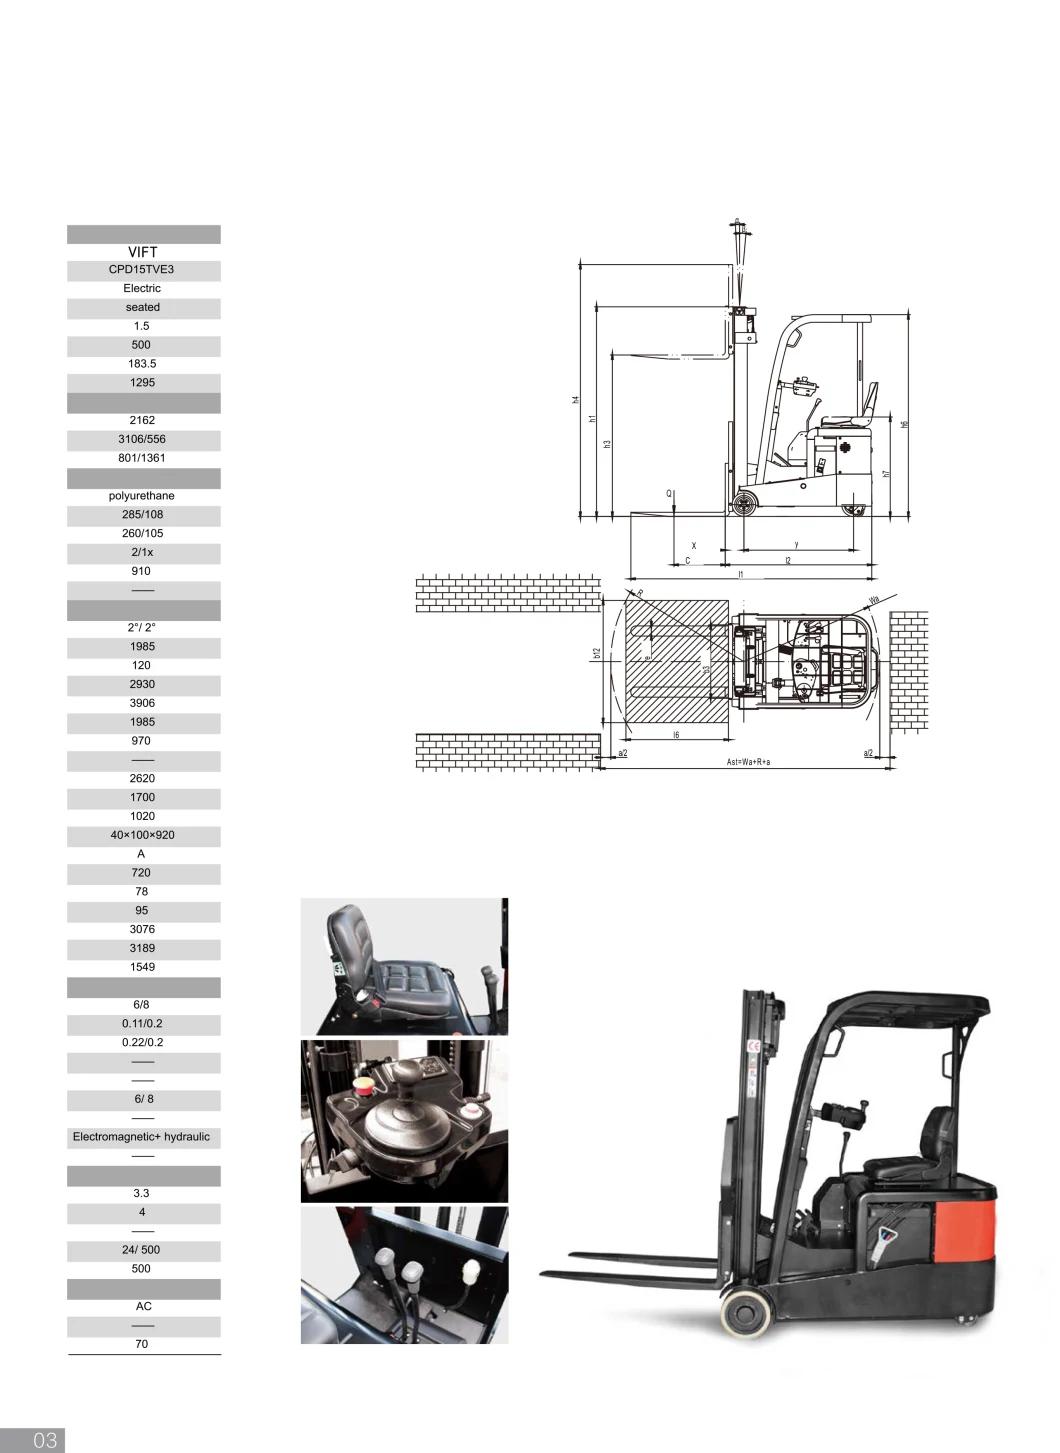 1 Ton Electric Forklift with 3 Wheel Work Permit Visa in Europe